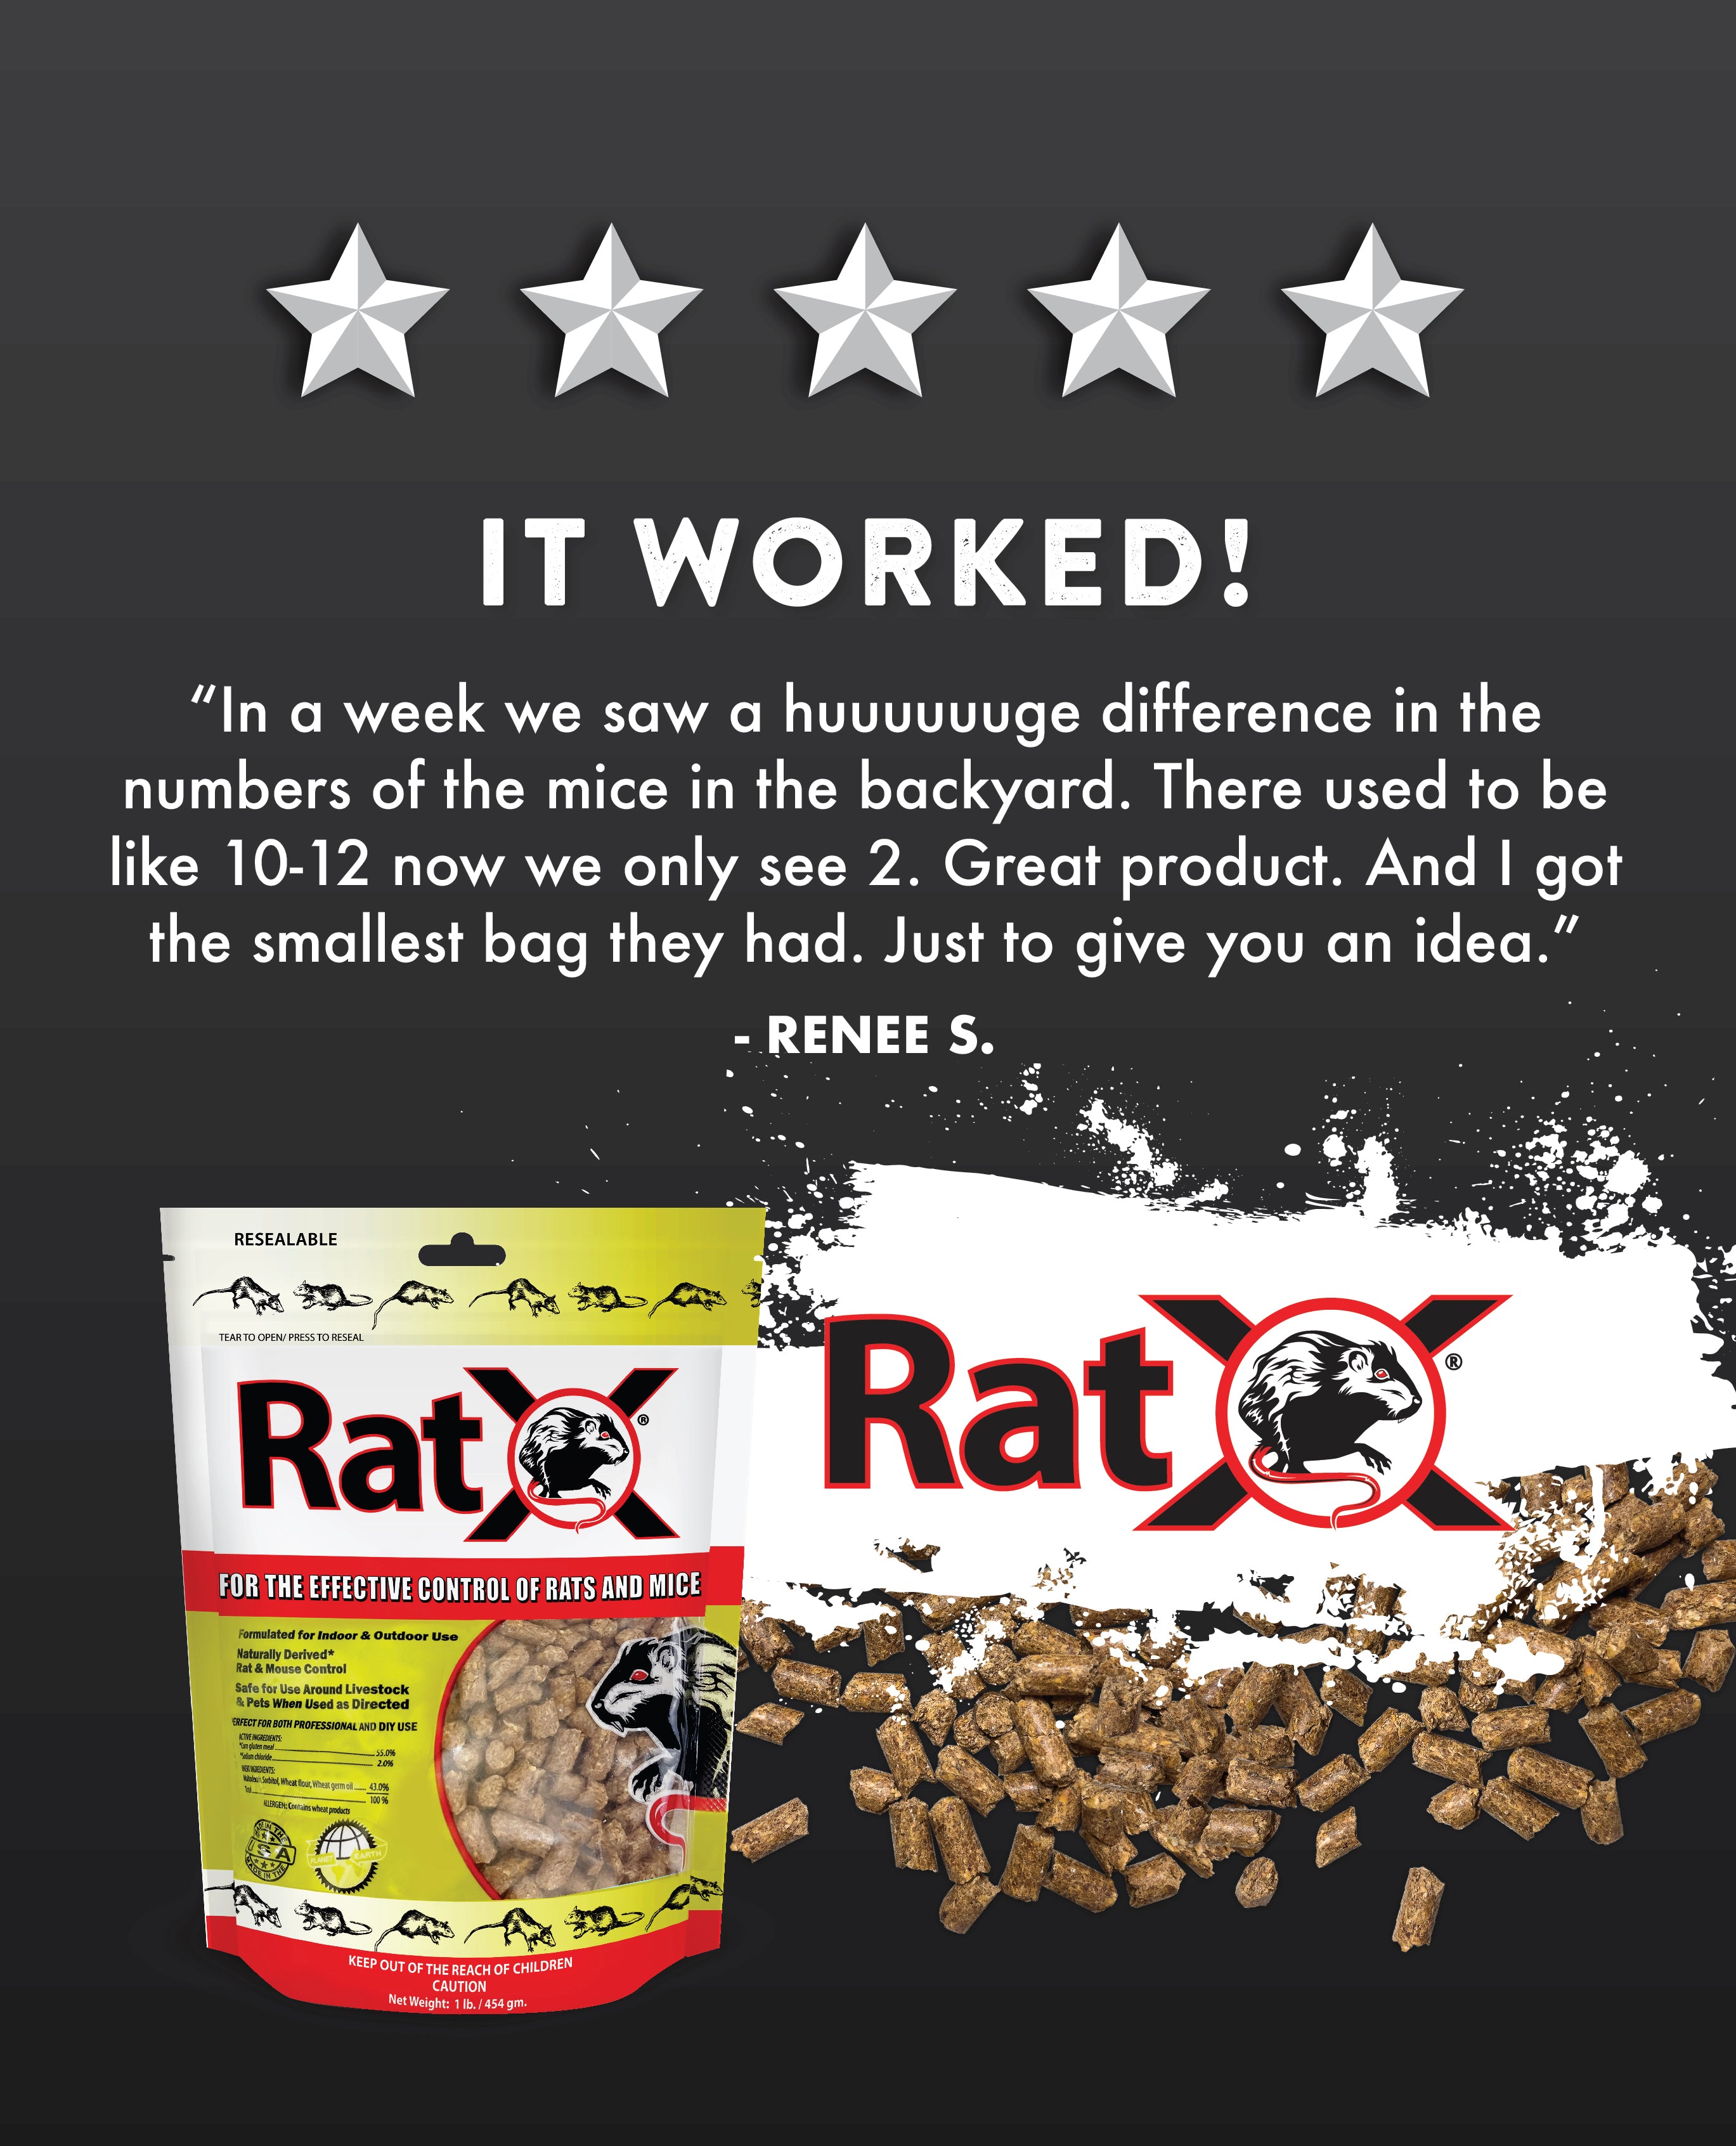 Doom Rattex Deadly Pellets Rat Poison 100g, Household Insecticides, Cleaning, Household